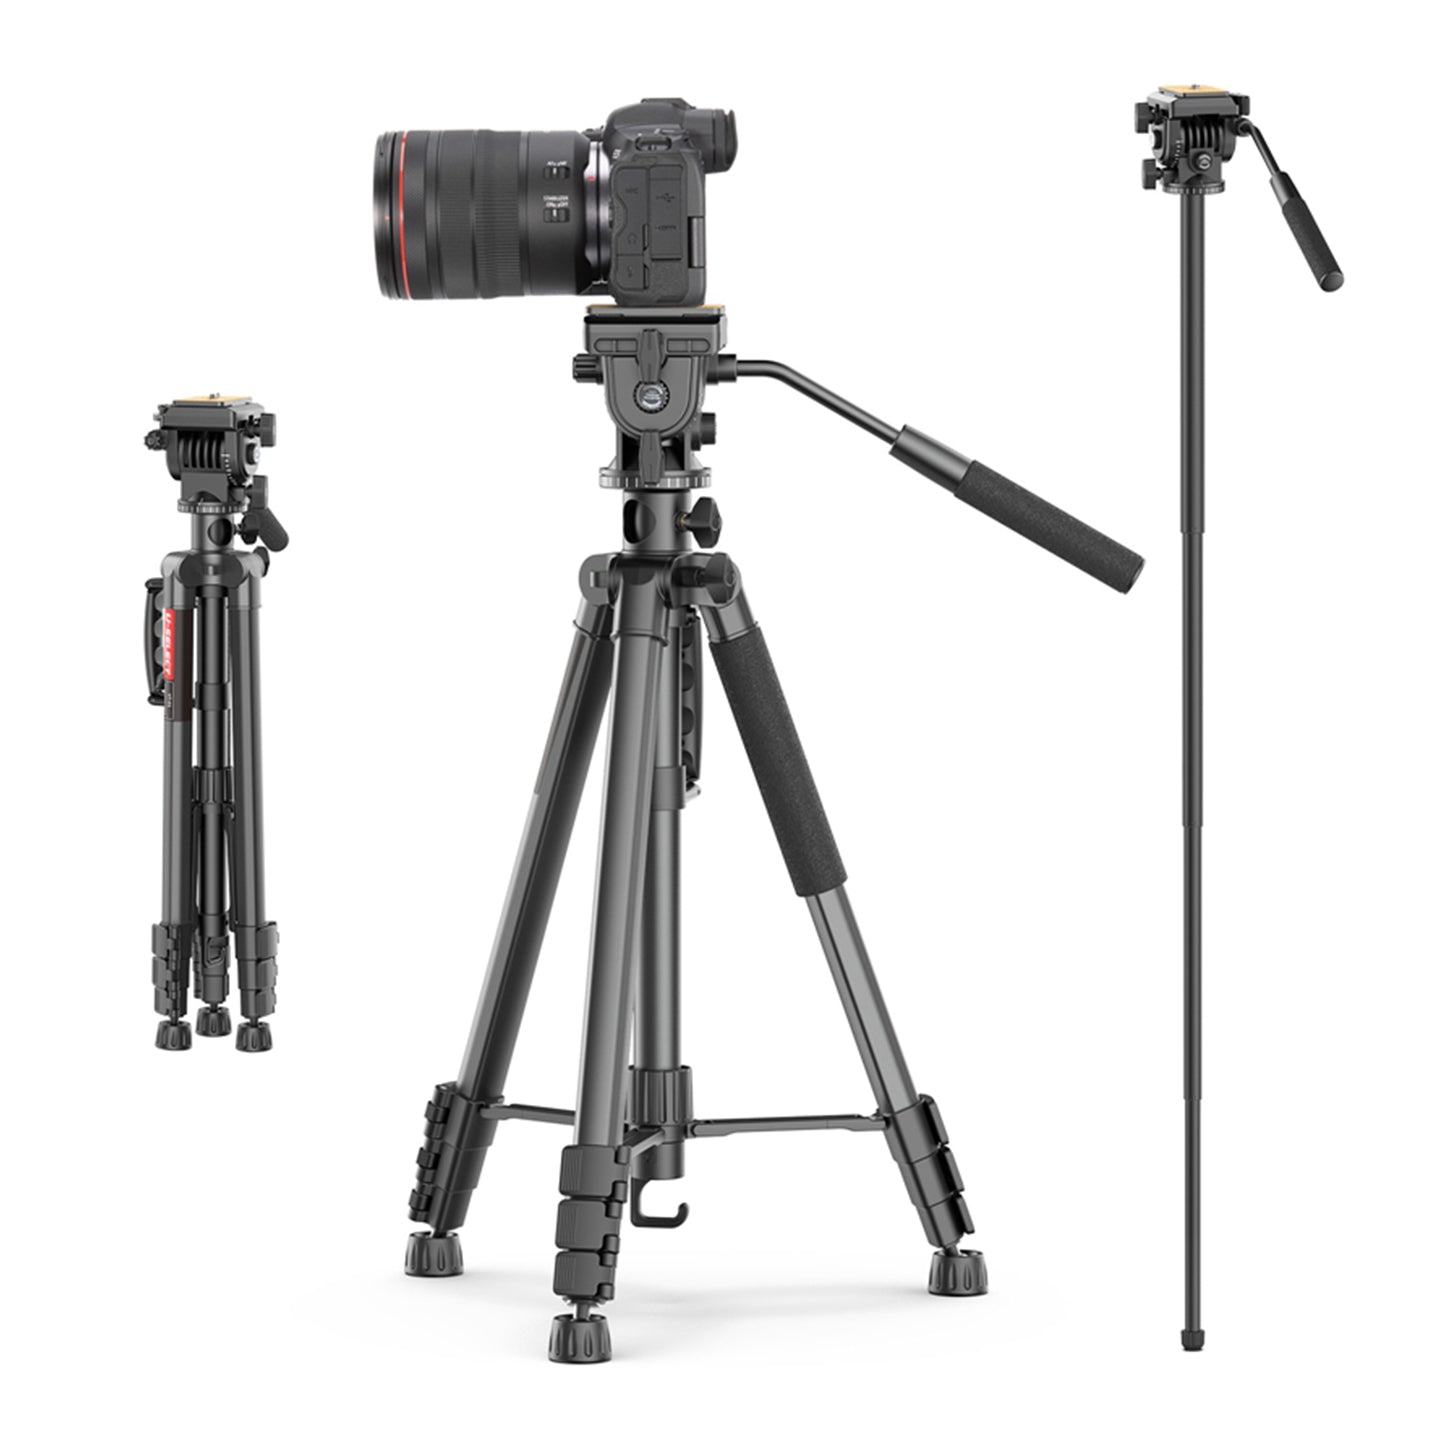 U-Select by Ulanzi VT-02 Multifunctional Universal Tripod/Monopod for Photography and Videography DSLR, Camcorder, Smartphones